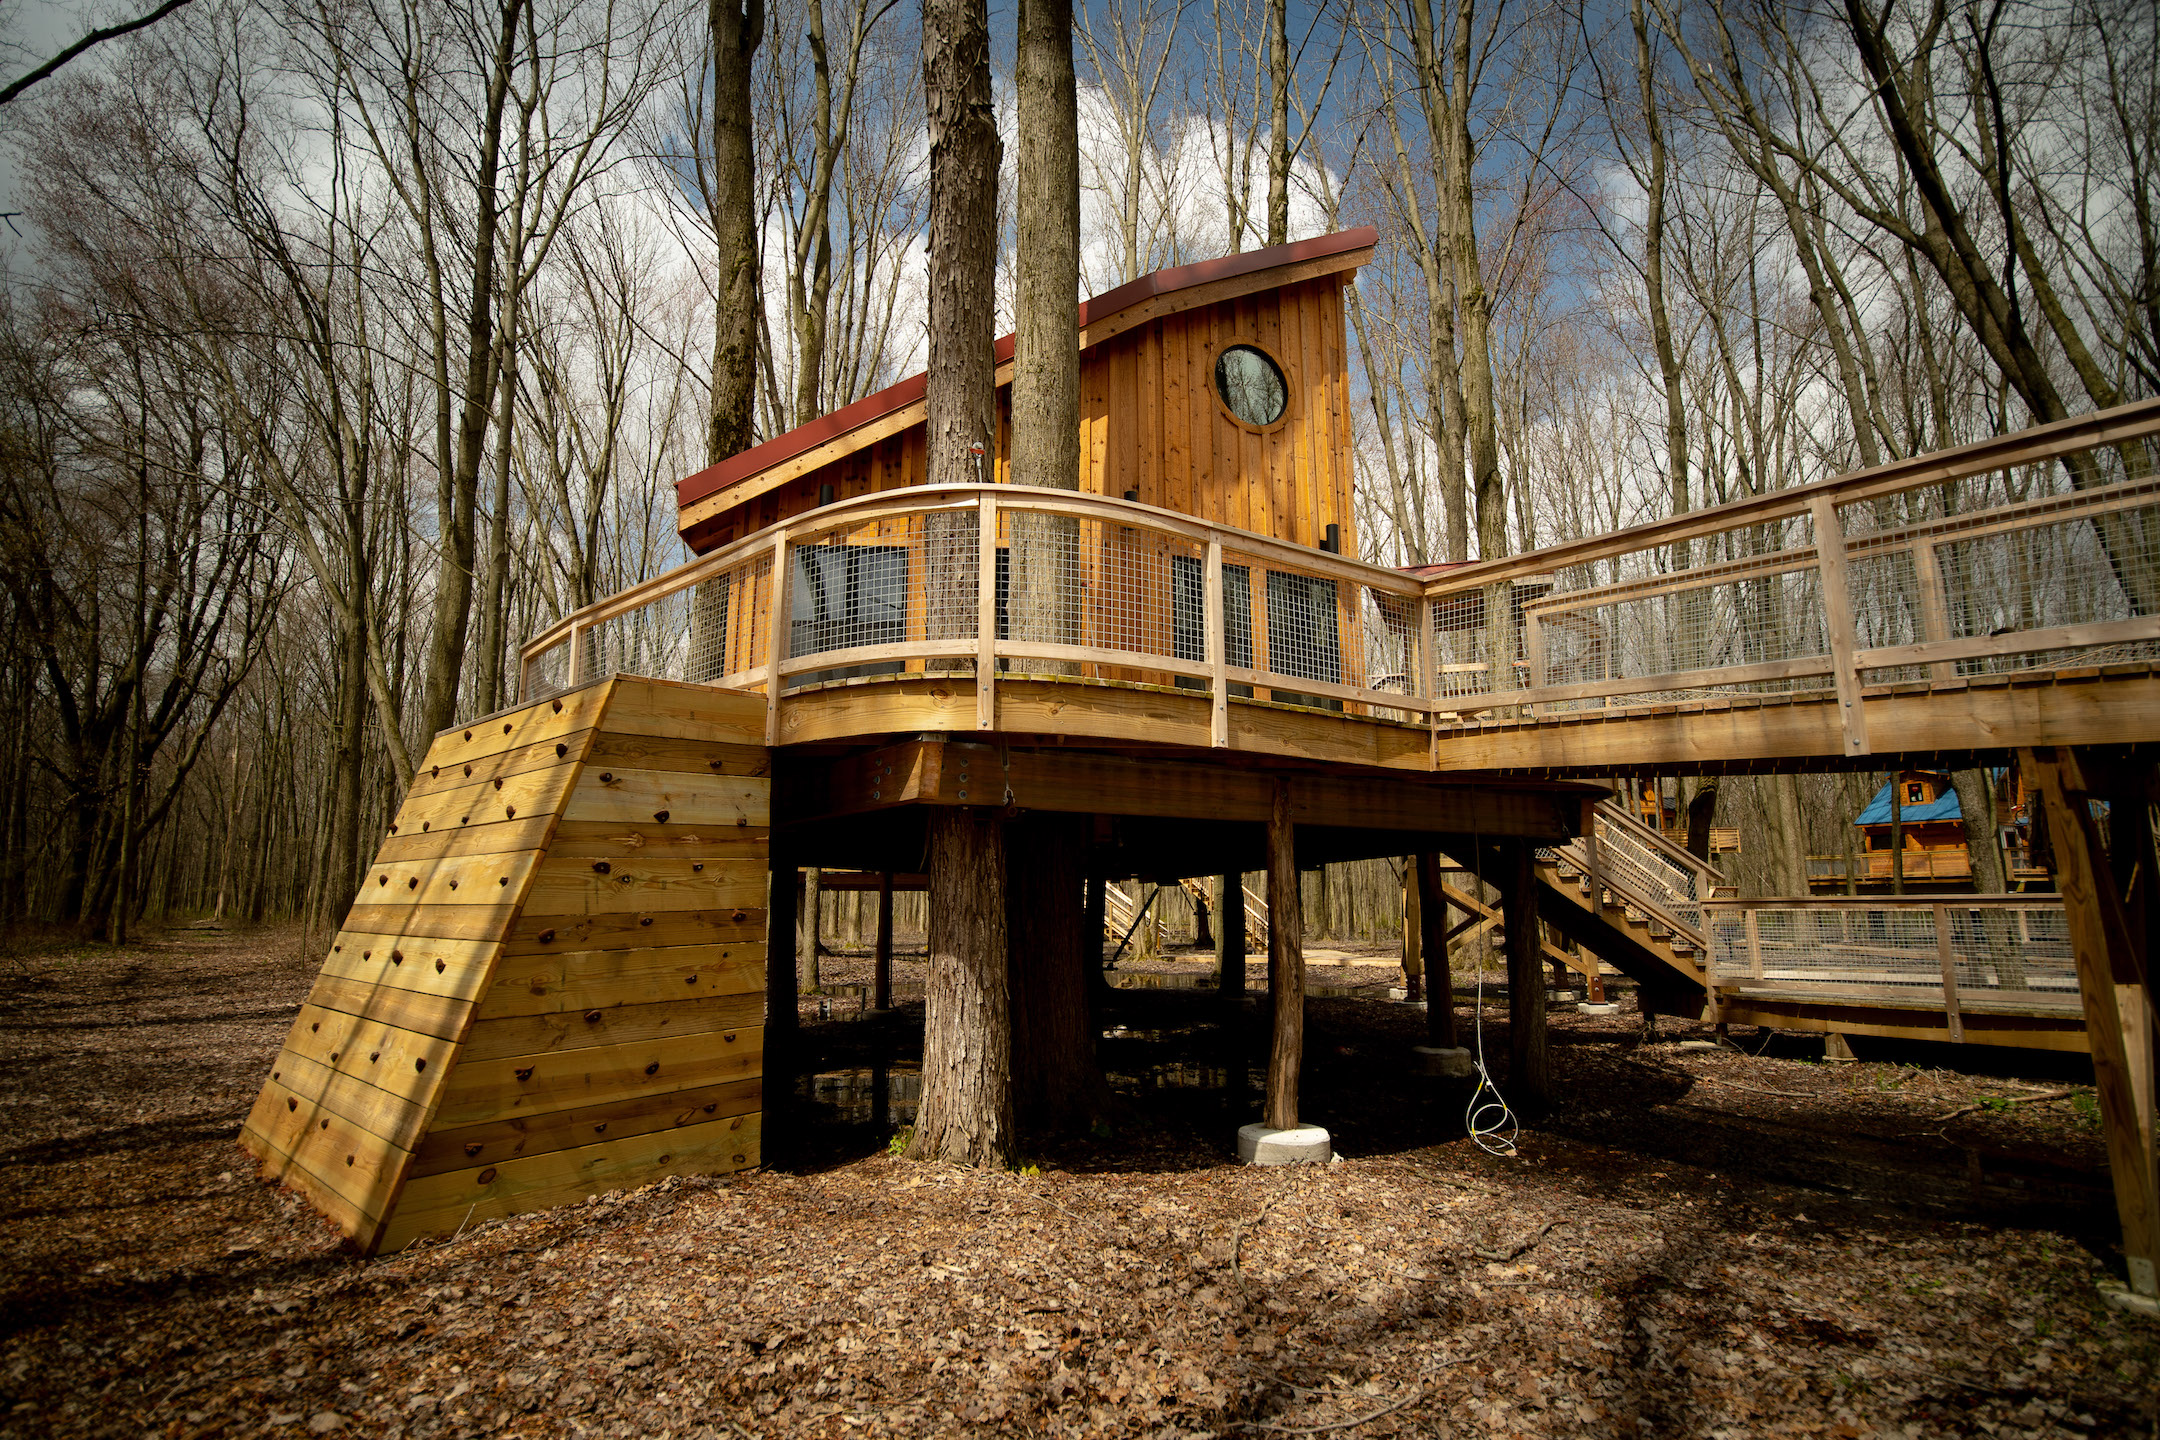  Treehouse Village  overnights available this summer at Metroparks Toledo s Oak Openings Preserve